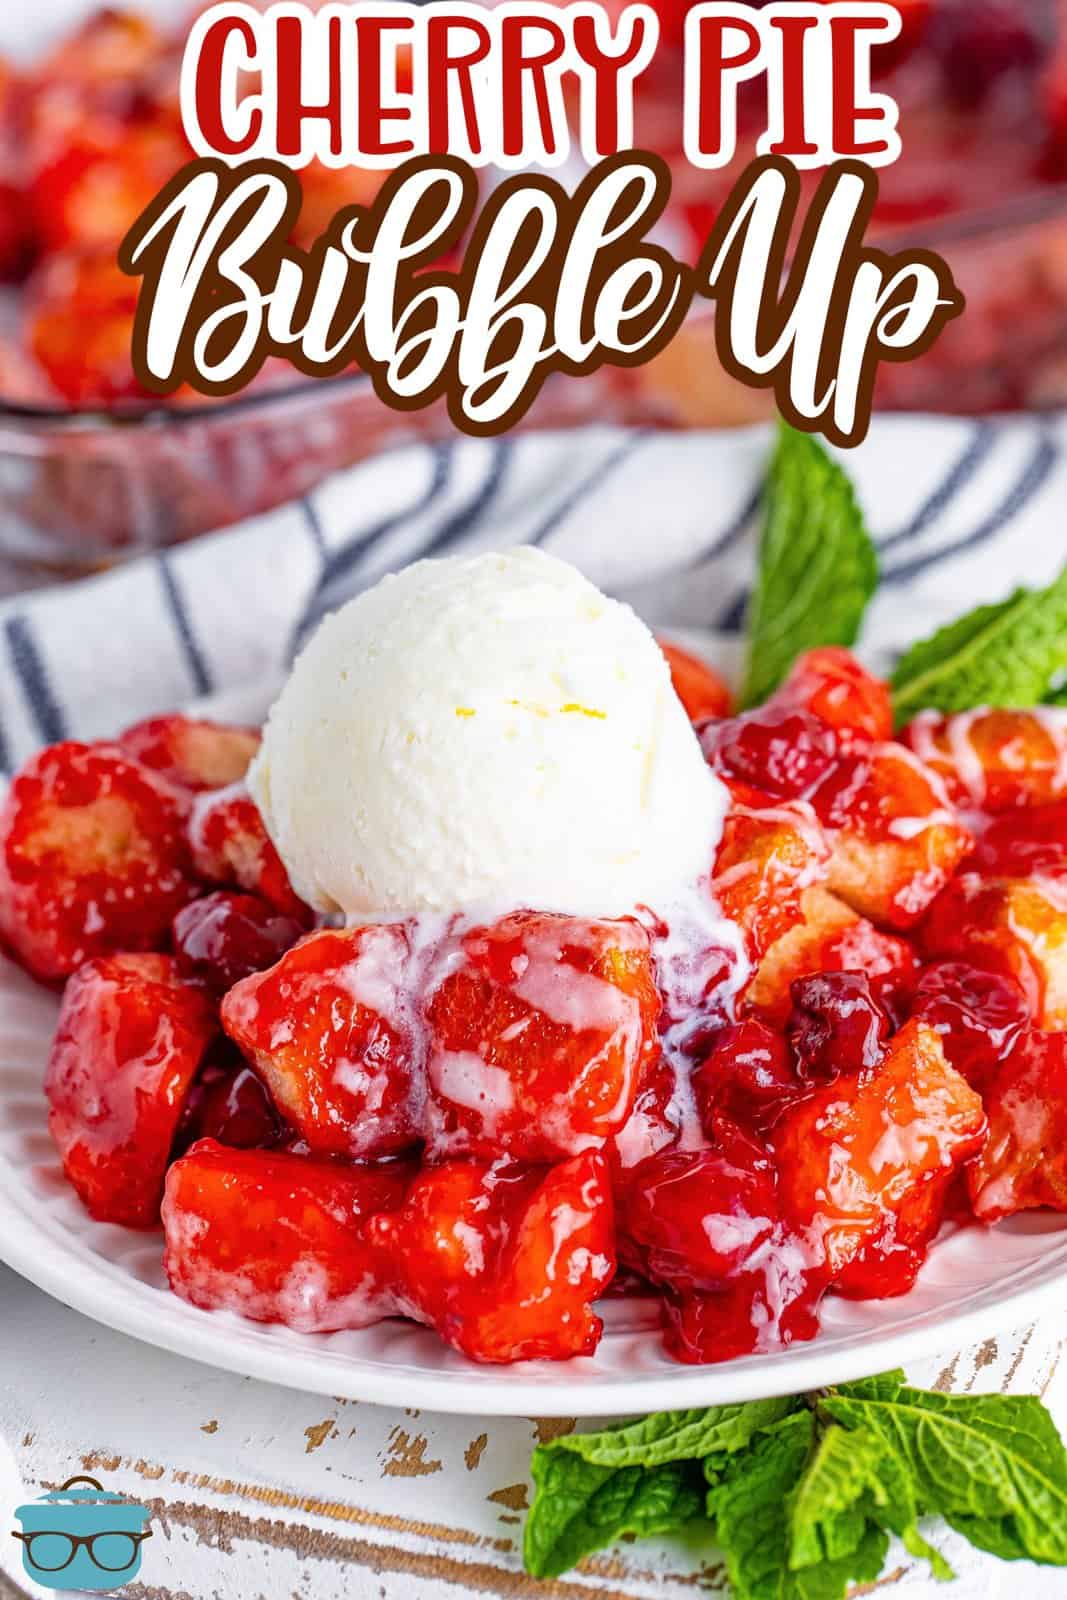 A plate with a generous serving of Cherry Pie Bubble Up.